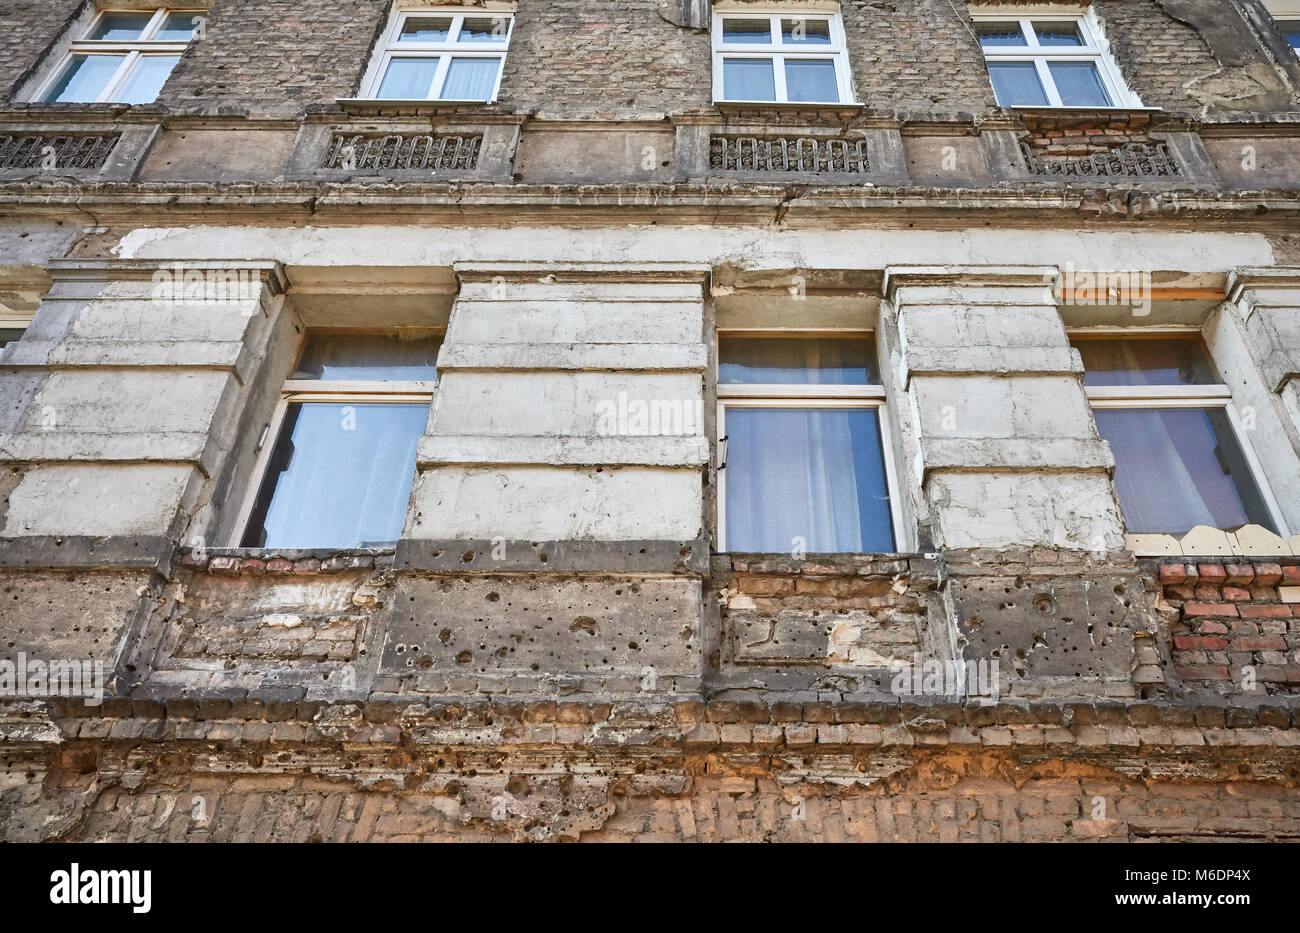 Bullet holes from the World War II in an apartment building in Niebuszewo district in Szczecin City, Poland. Stock Photo